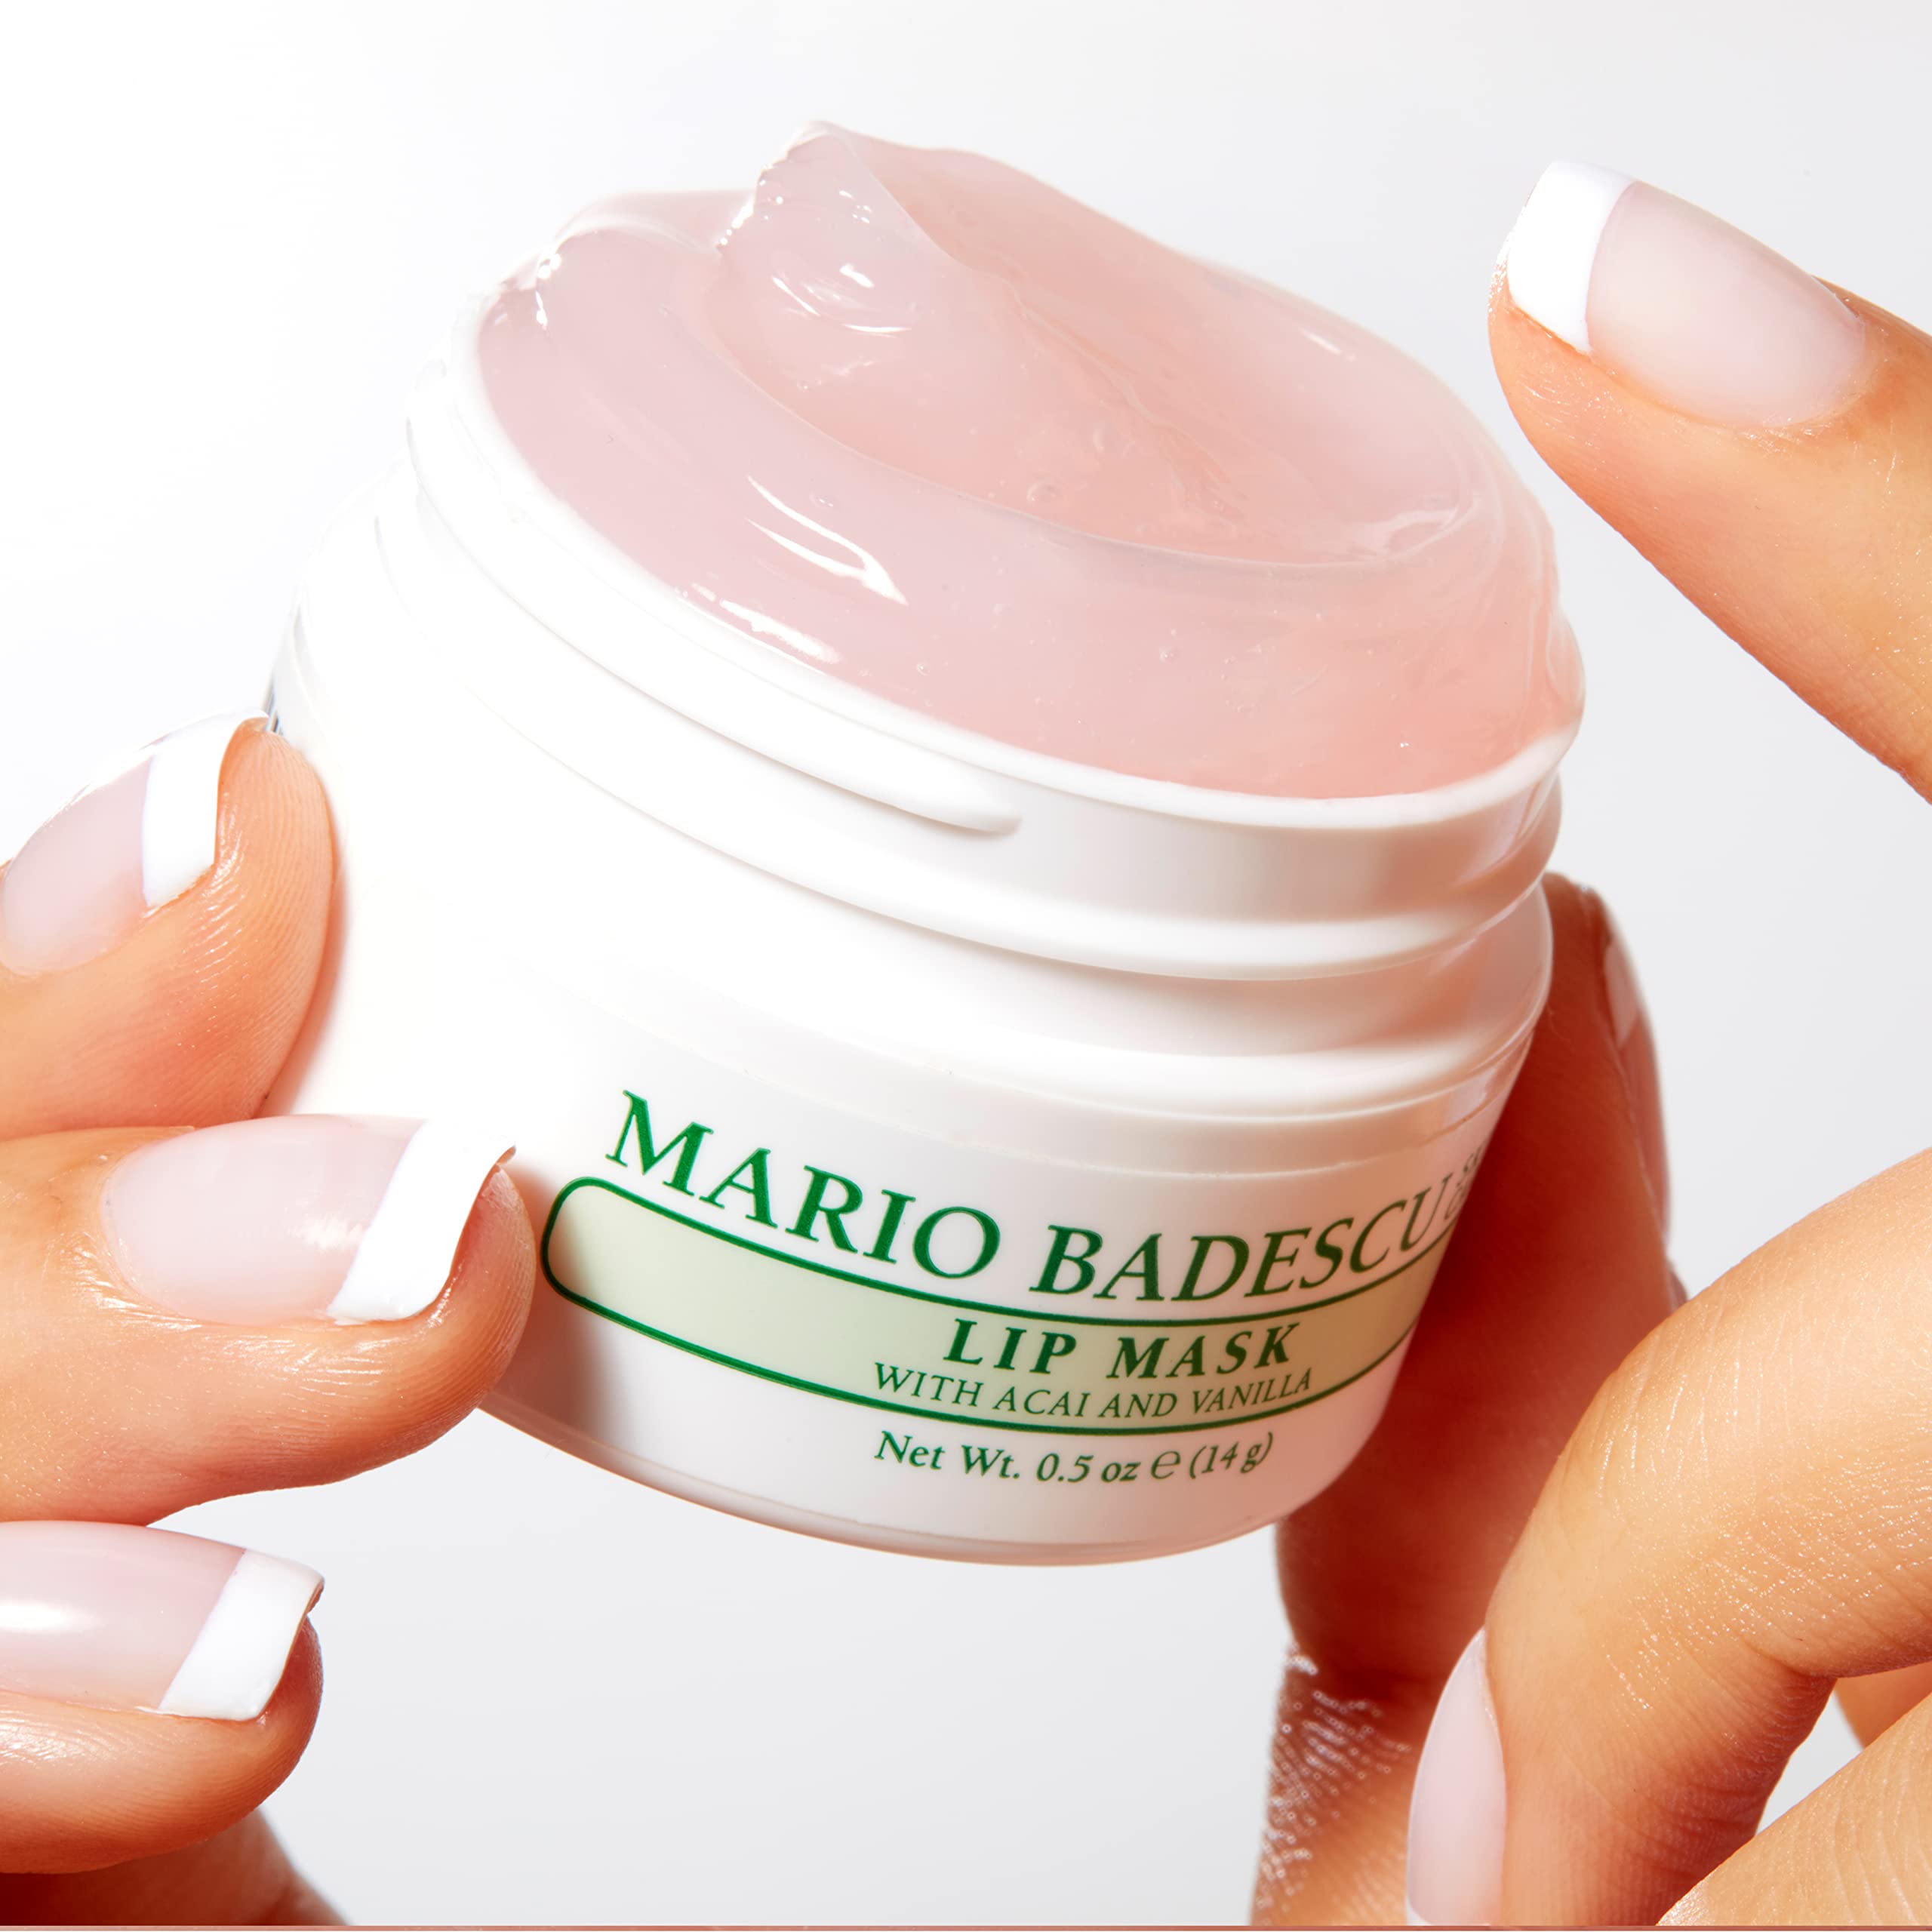 Mario Badescu Lip Mask with Acai and Vanilla for All Skin Types, Overnight Lip Treatment Enriched With Skin Softening Coconut Oil and Hydrating Shea Butter